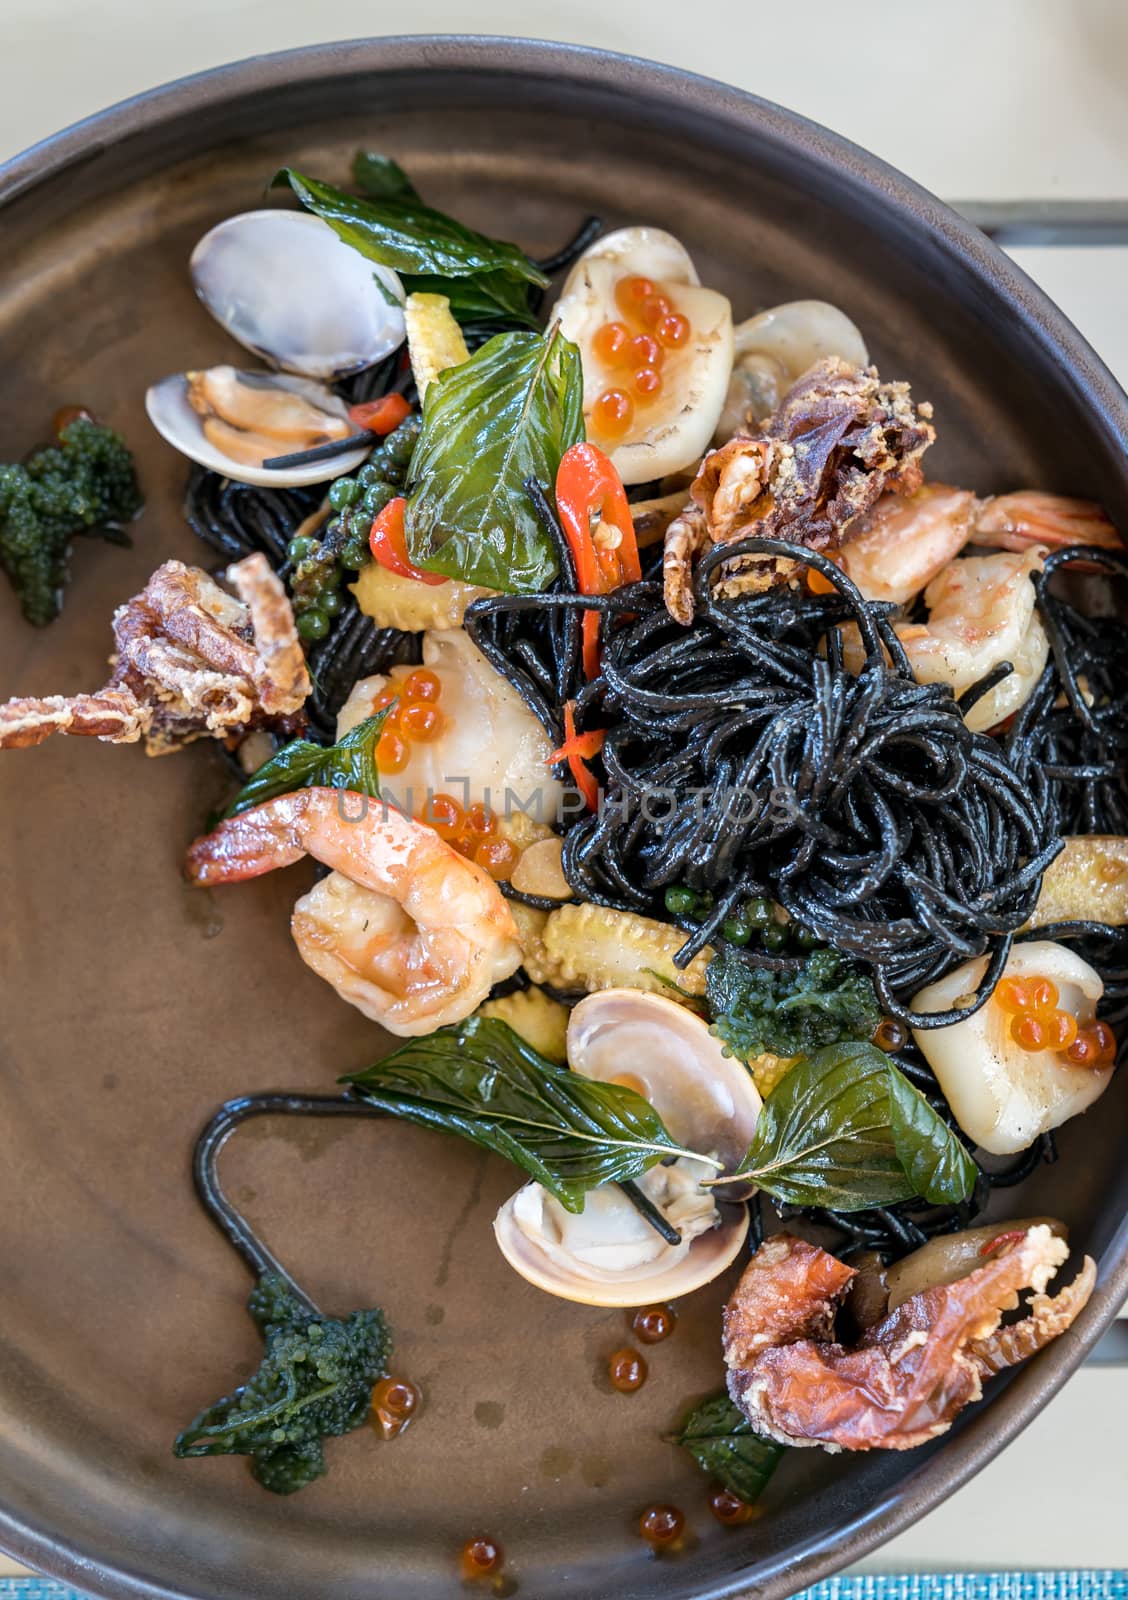 The Mediterranean delicacy food. Black seafood pasta spaghetti  with mussels calm shrimp and crab